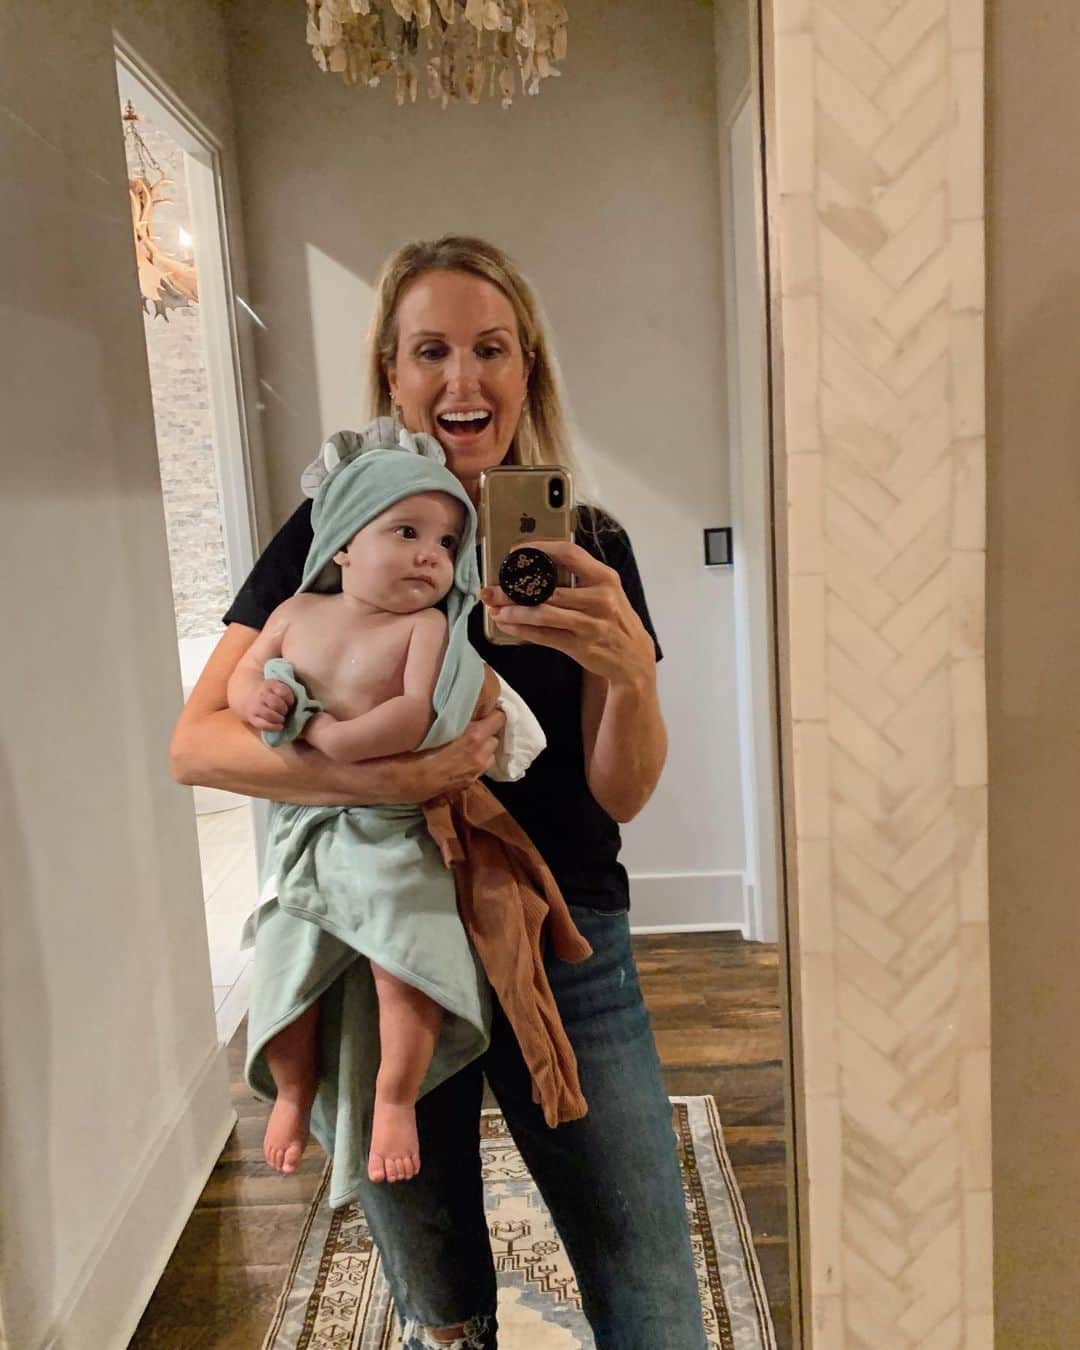 コリー・ロバートソンさんのインスタグラム写真 - (コリー・ロバートソンInstagram)「I love to come around the corner of my bathroom and see my grand babies faces in this mirror.  They get excited every time they see themselves and it makes me happy every time I see them in my arms.  They are getting old enough now that they remember this mirror is here and start kicking their legs even before we round the corner. ⠀ ⠀ I’ve been reading James over and over again throughout all of the hard things that 2020 has brought. There is so much there that speaks to what we are going through right now. I have also been listening and reading a lot to things online and in the news and honestly sometimes I feel like I don’t know what’s up or down, right or wrong, truth or lies. ⠀⠀ ⠀⠀ BUT thankfully God’s word has proven itself once again to be always good and true. In His word I find truth and peace, strength and confidence, forgiveness and compassion, challenge and grace, freedom and love. Here’s an exert from James to soak on: ⠀⠀ “My dear brothers and sisters, take note of this: Everyone should be quick to listen, slow to speak and slow to become angry, because human anger does not produce the righteousness that God desires. Therefore, get rid of all moral filth and the evil that is so prevalent and humbly accept the word planted in you, which can save you. Do not merely listen to the word, and so deceive yourselves. Do what it says. Anyone who listens to the word but does not do what it says is like someone who looks at his face in a mirror and, after looking at himself, goes away and immediately forgets what he looks like. But whoever looks intently into the perfect law that gives freedom, and continues in it—not forgetting what they have heard, but doing it—they will be blessed in what they do. Those who consider themselves religious and yet do not keep a tight rein on their tongues deceive themselves, and their religion is worthless. Religion that God our Father accepts as pure and faultless is this: to look after orphans and widows in their distress and to keep oneself from being polluted by the world.”⠀⠀ ‭‭James‬ ‭1:19-27‬ ‭NIV‬‬」6月15日 6時32分 - bosshogswife